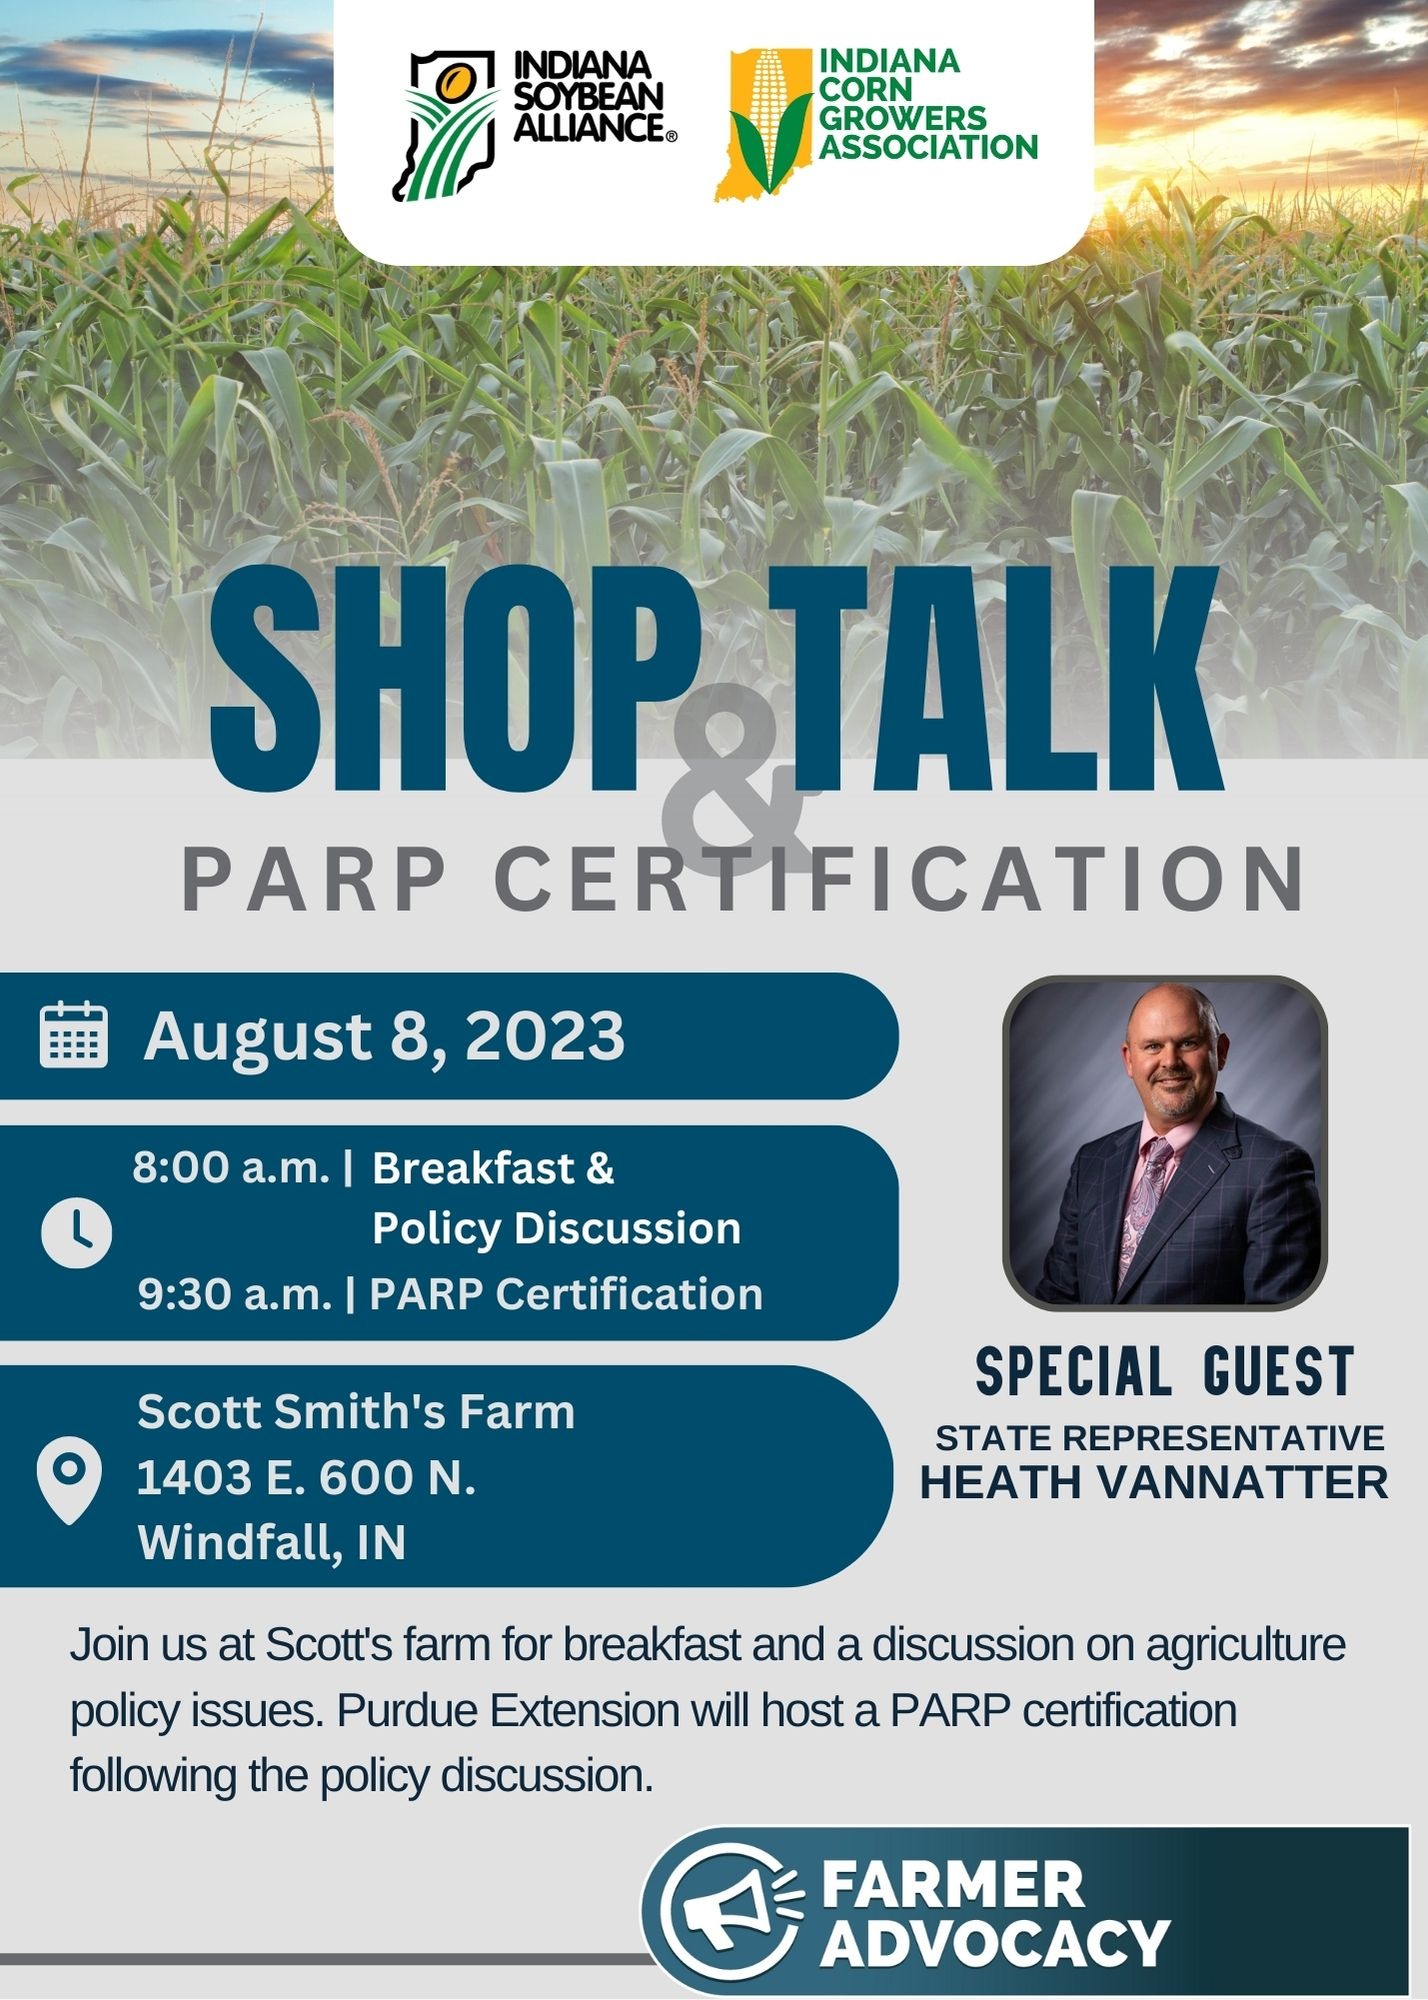 Aug 8th Shop Talk and PARP Certification